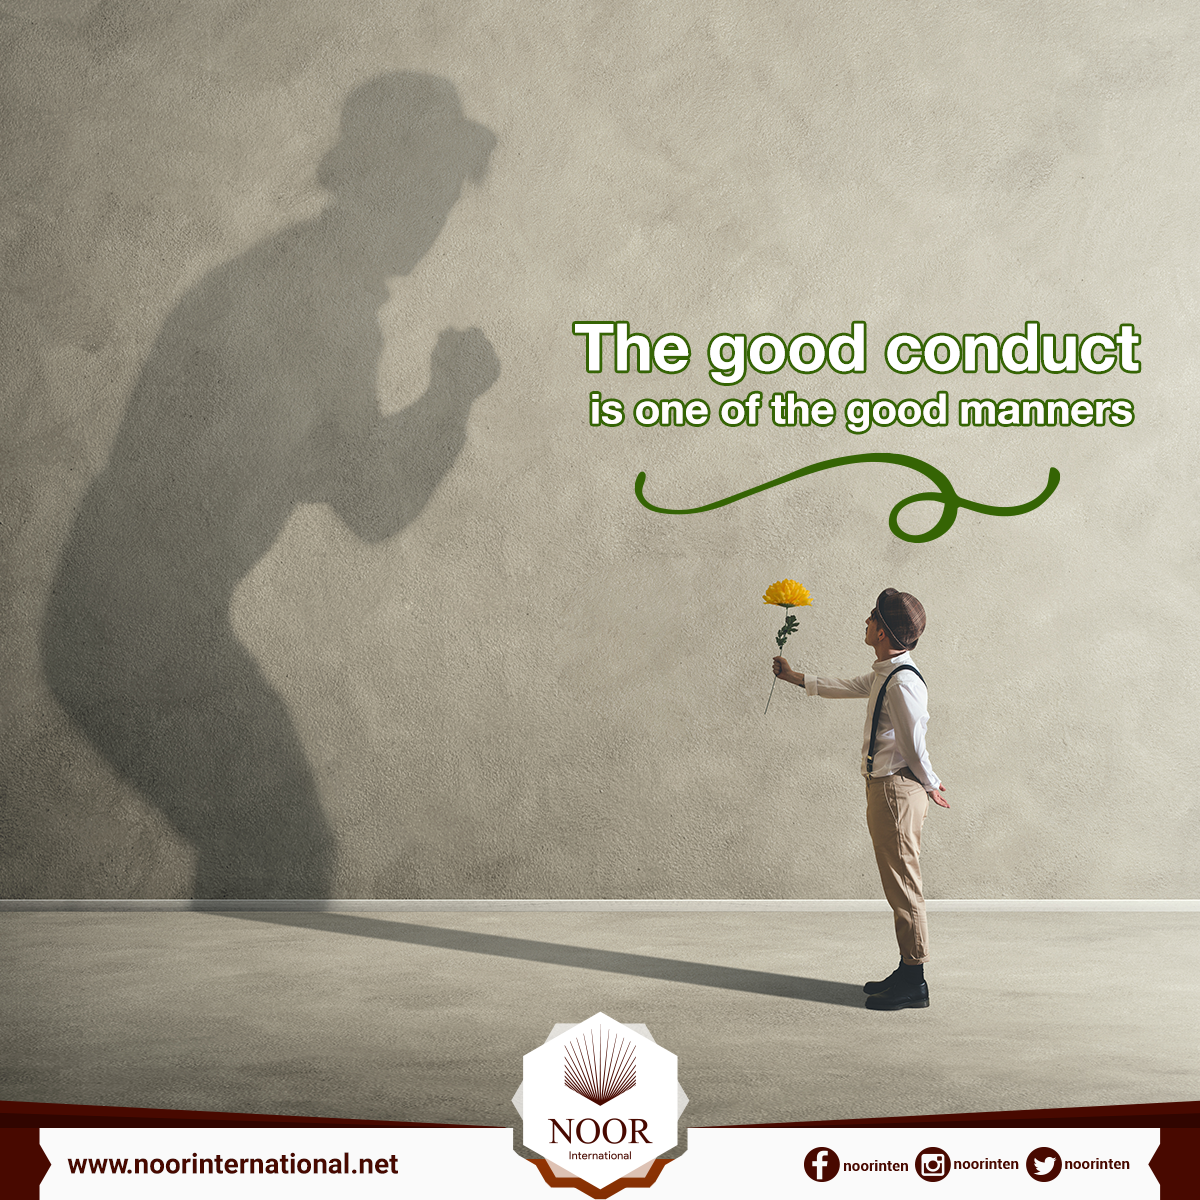 The good conduct is one of the good manners